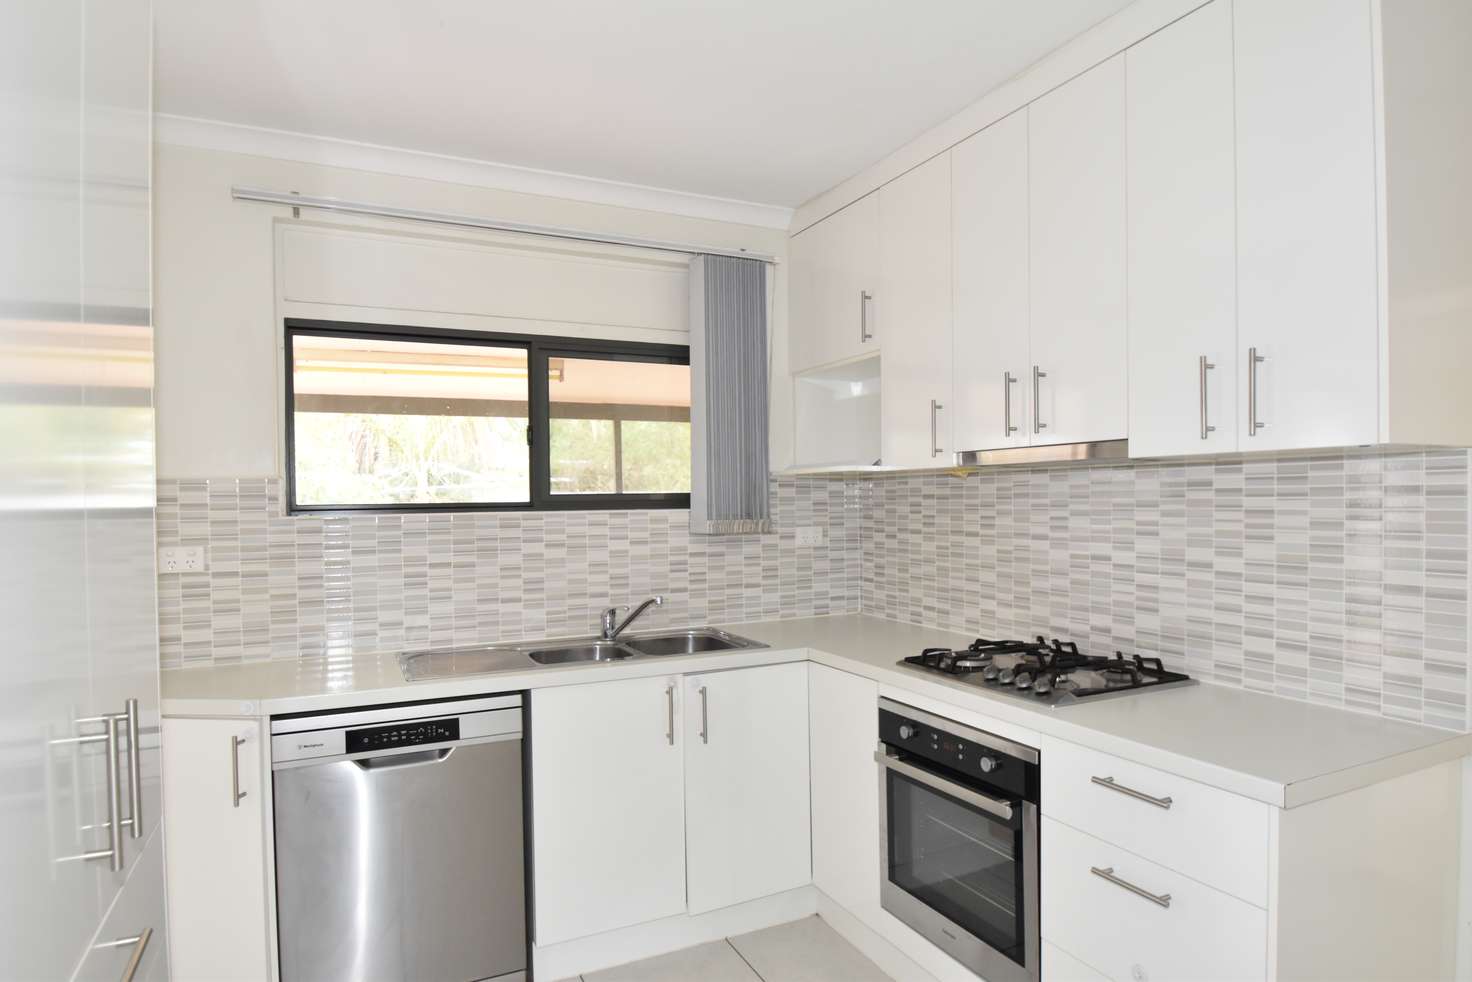 Main view of Homely house listing, 5 Mahomed Street, The Gap NT 870